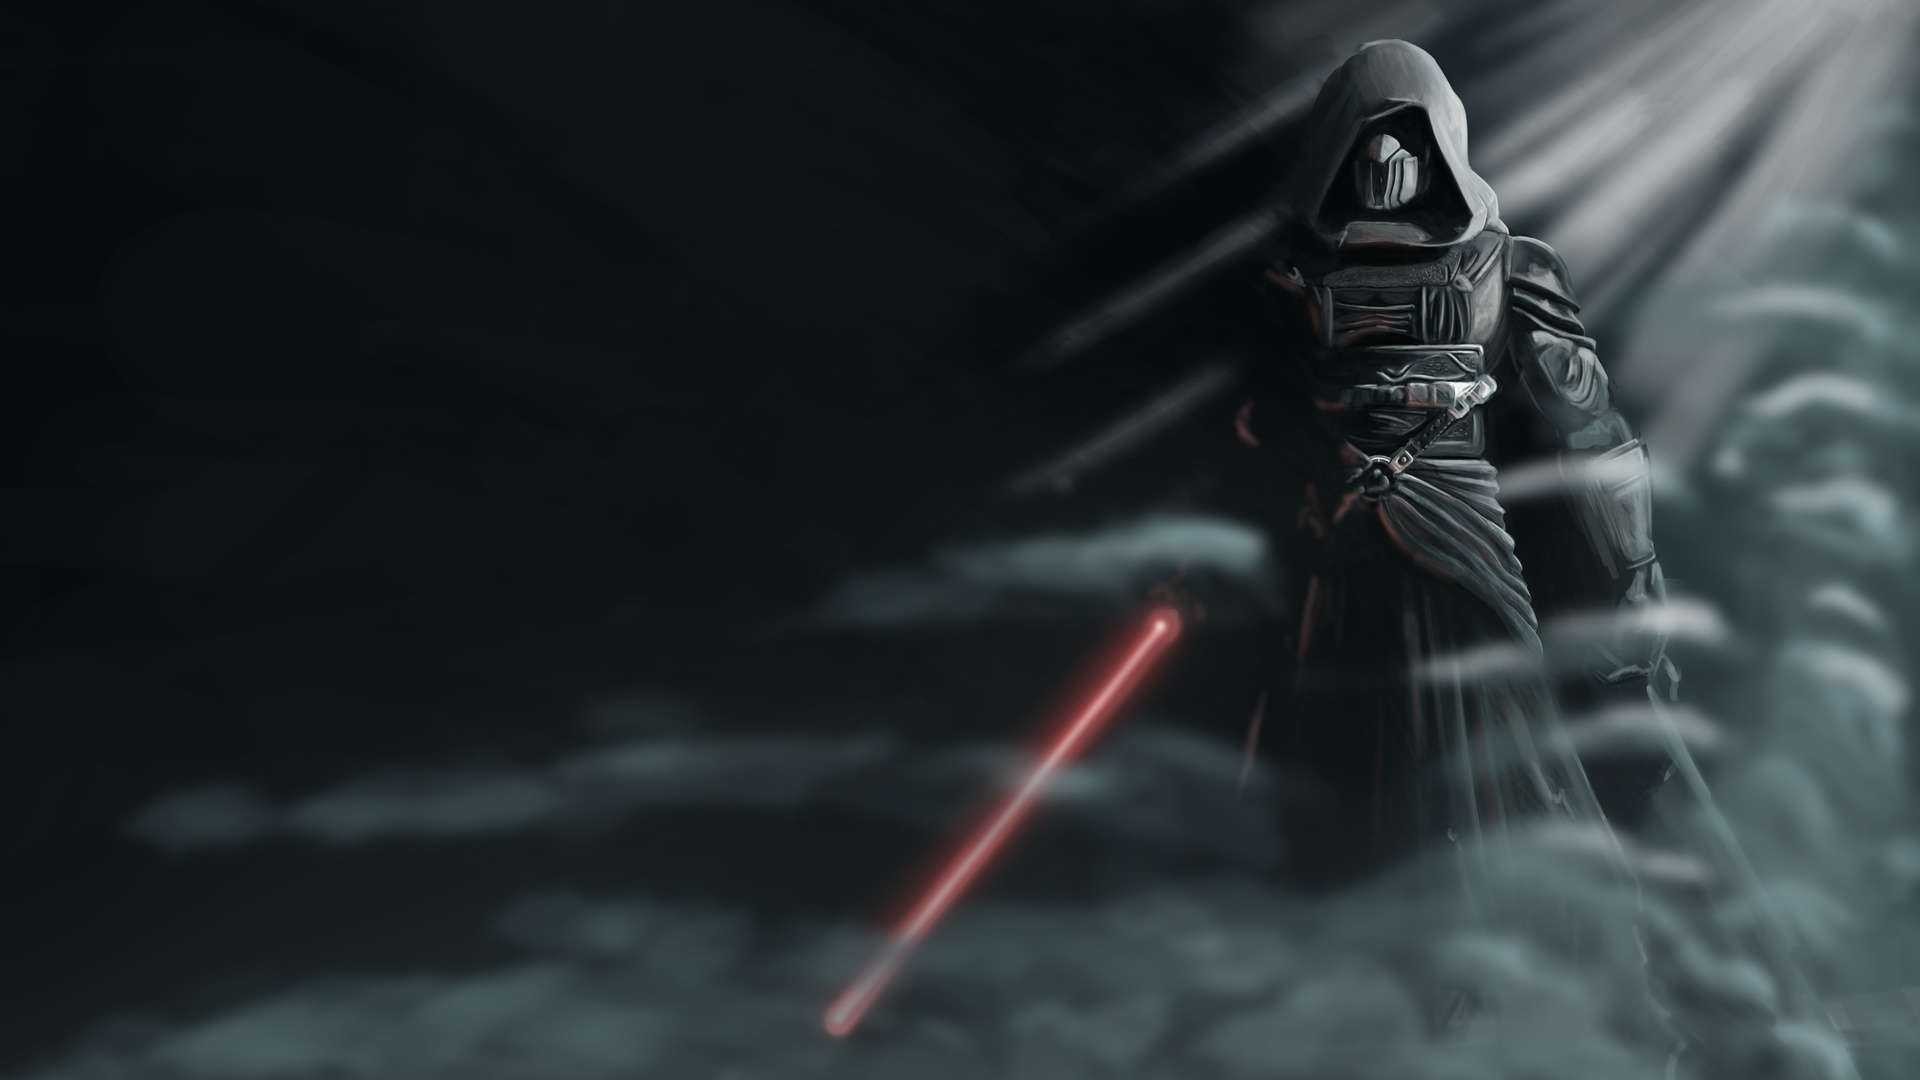 1920x1080  Star Wars Sith Full Hd As Wallpaper High Resolution Of Pc. 80 Â·  Download Â· Res:  ...